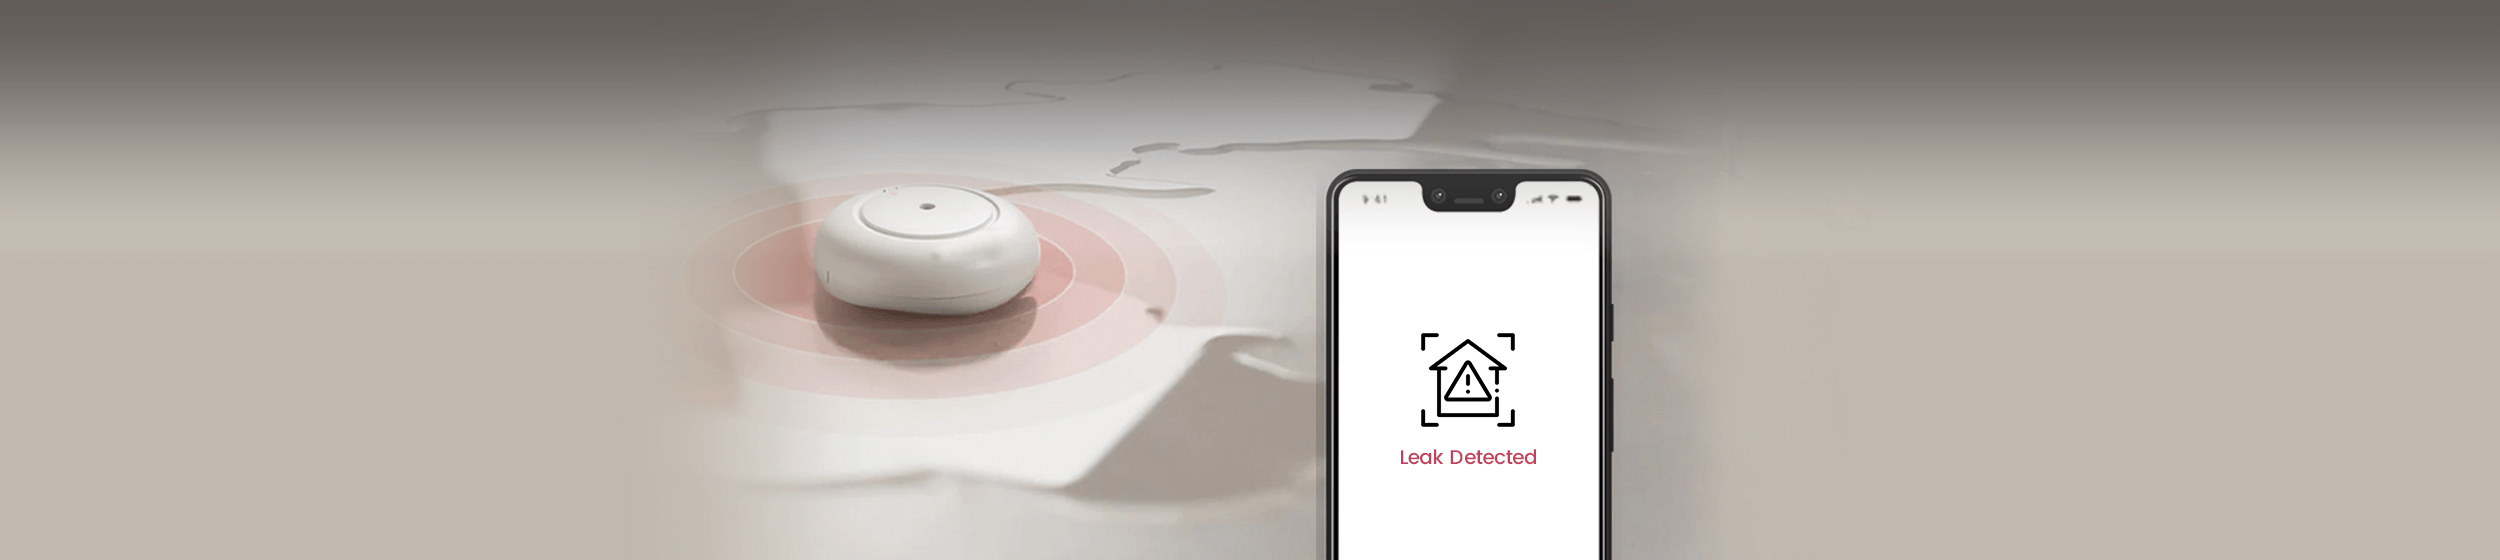 Banner-Smart Water Leak Detection and Flood Prevention System of Homes & Buildings for US-Based Home Automation Company